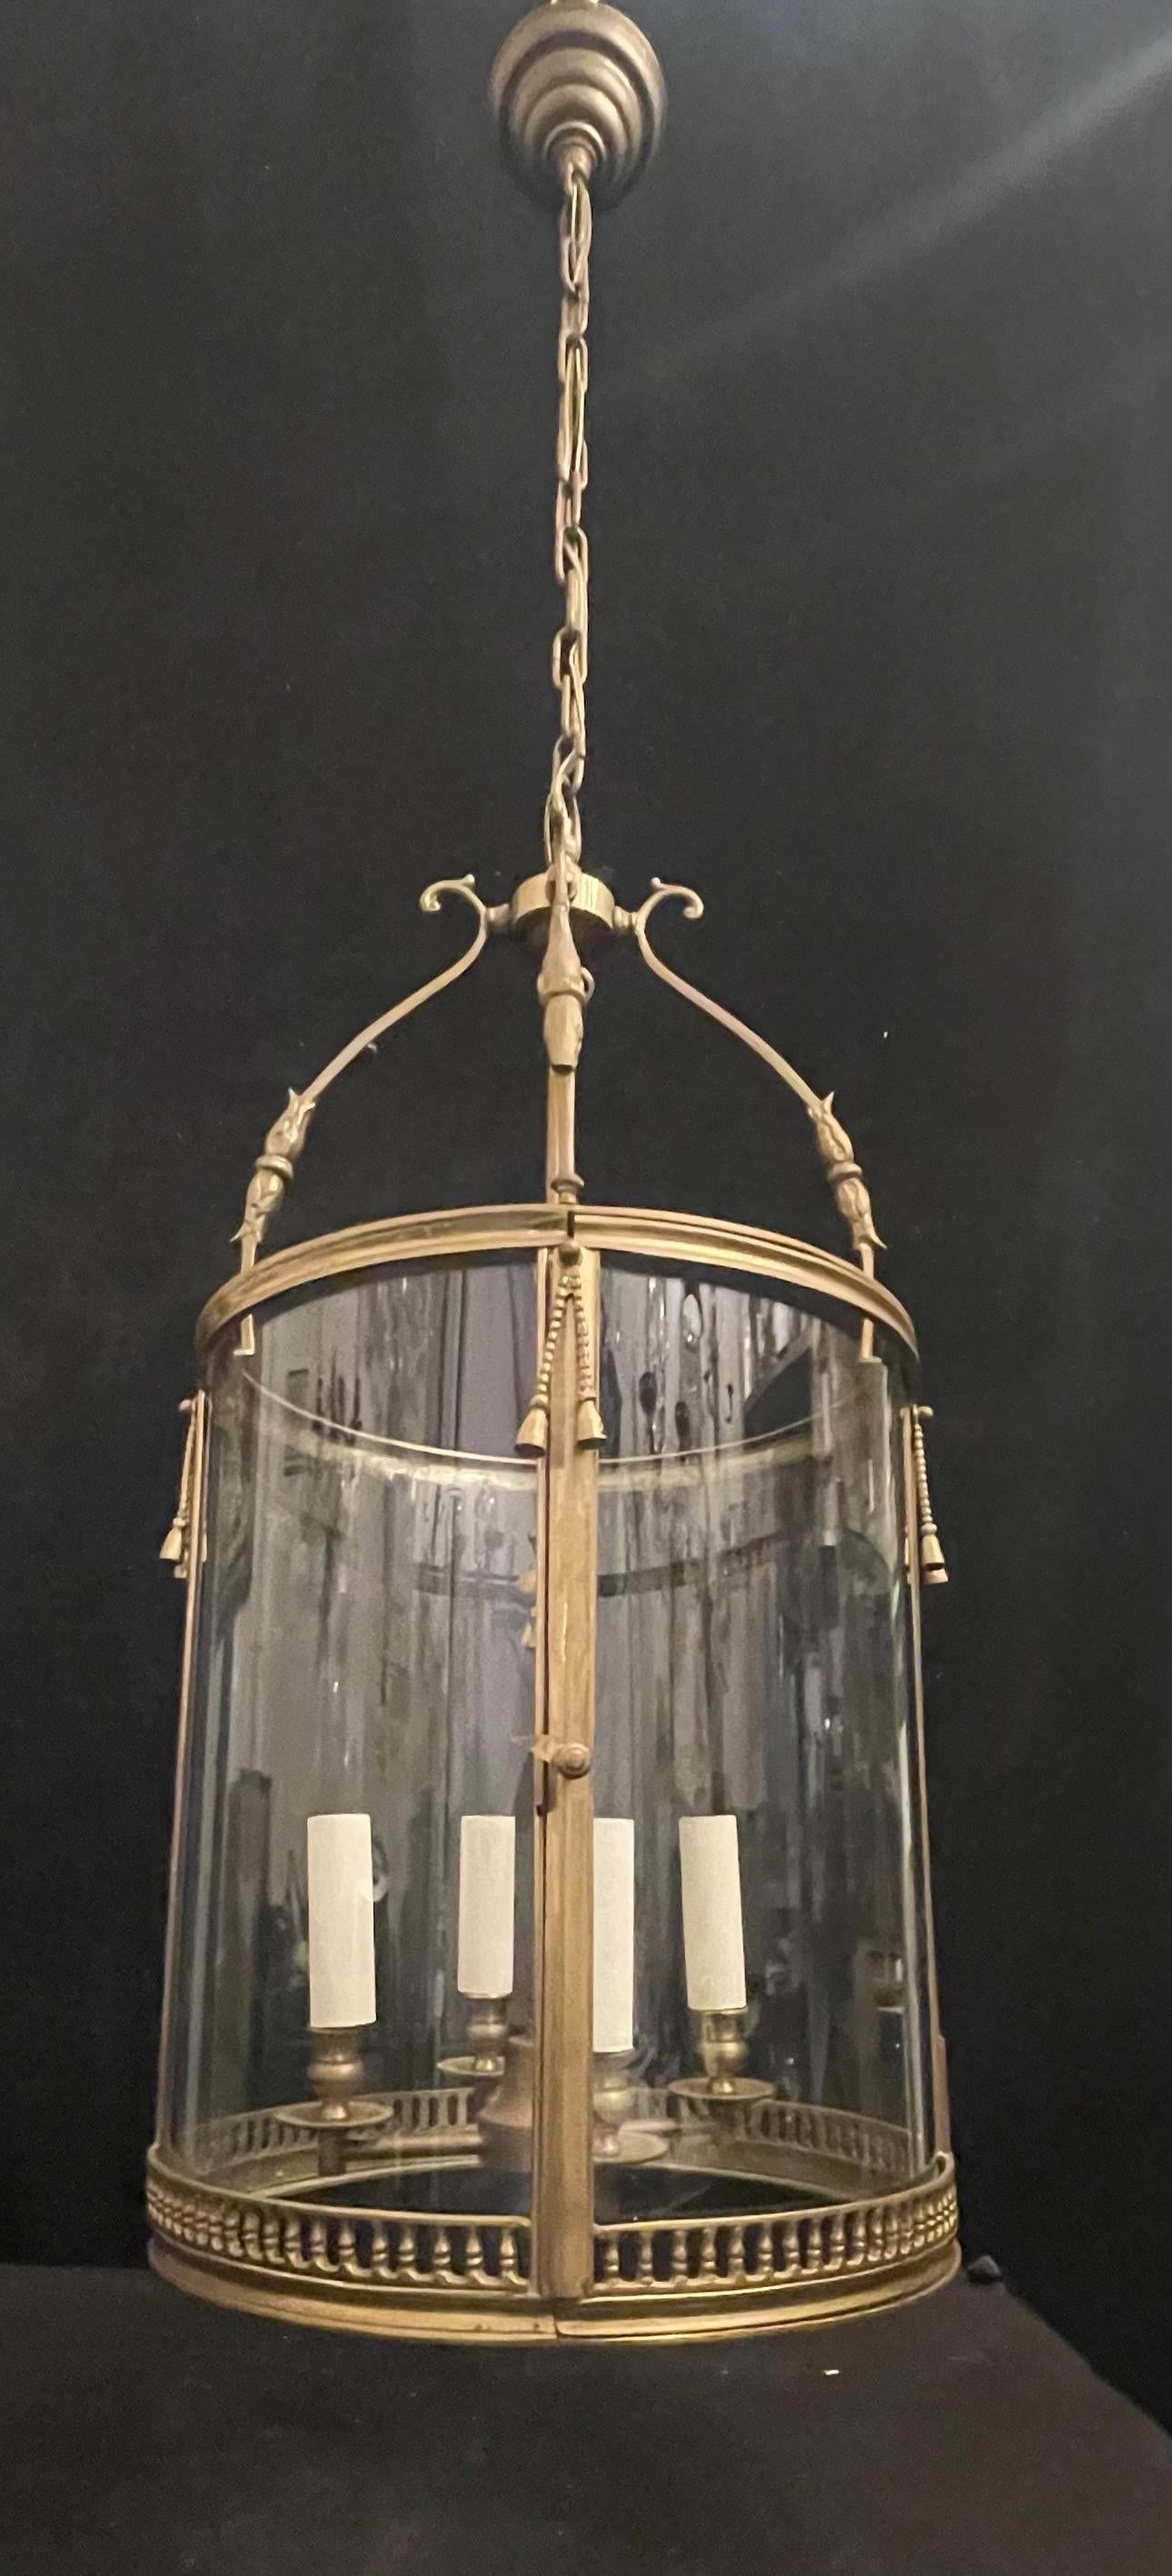 A wonderful large French Louis XVI style bronze with tassels 4 candelabra light lantern fixture this chandelier comes ready to install with updated wiring & chain, canopy and mounting hardware.